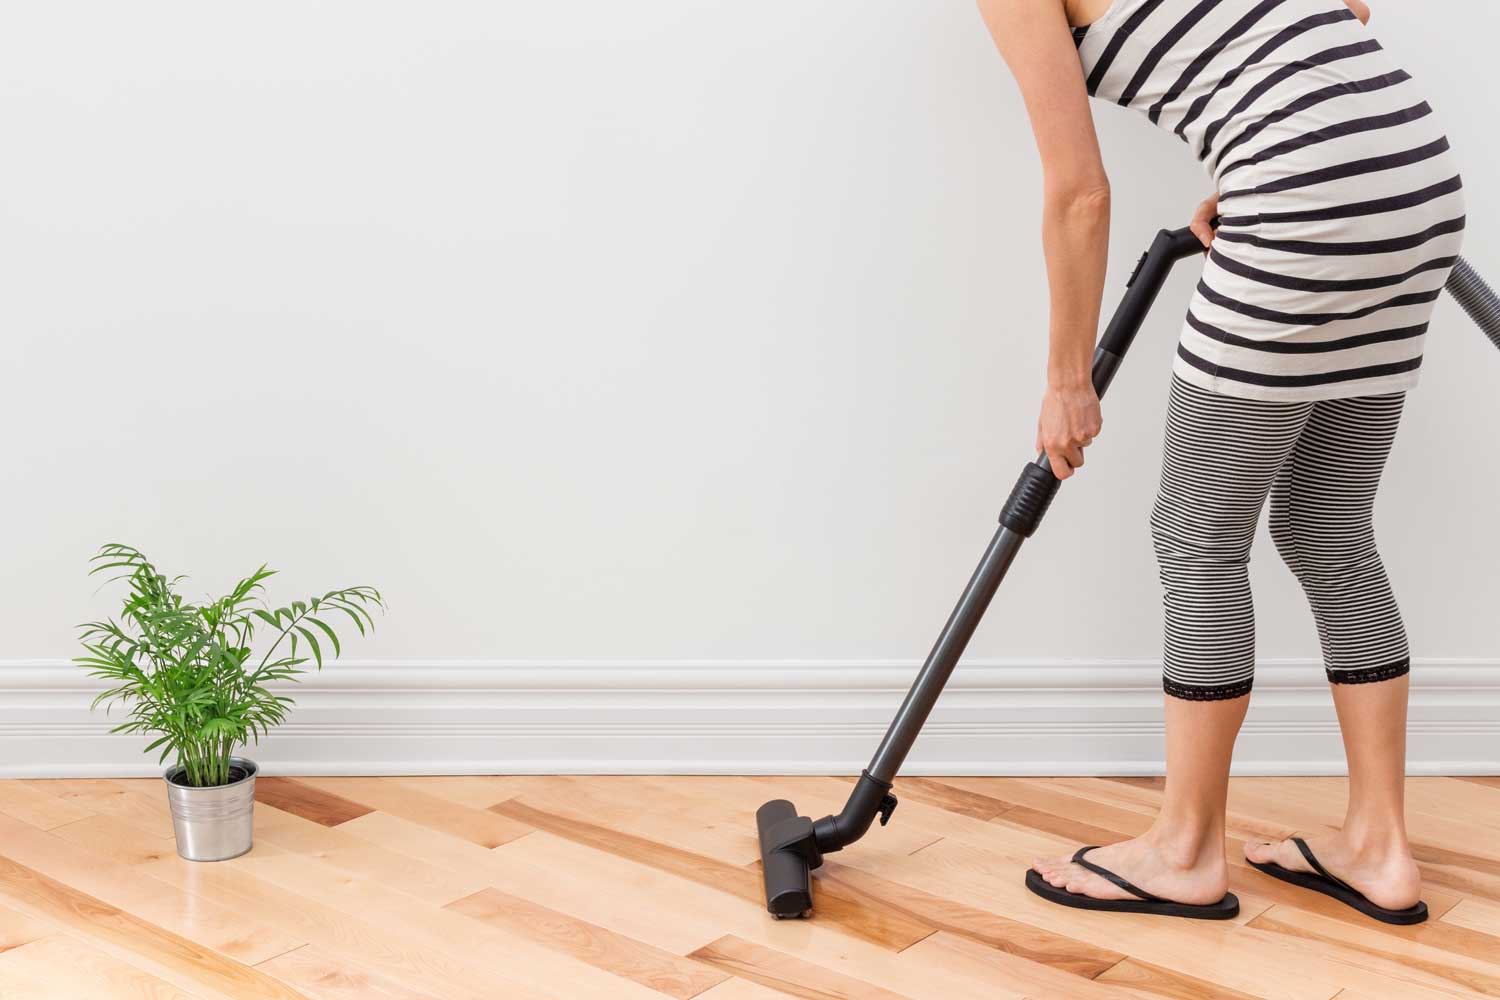 Regulary vacuum or sweep floors to remove dirt and keep your home floors looking amazing - tips from Footprints Floors in Raleigh.